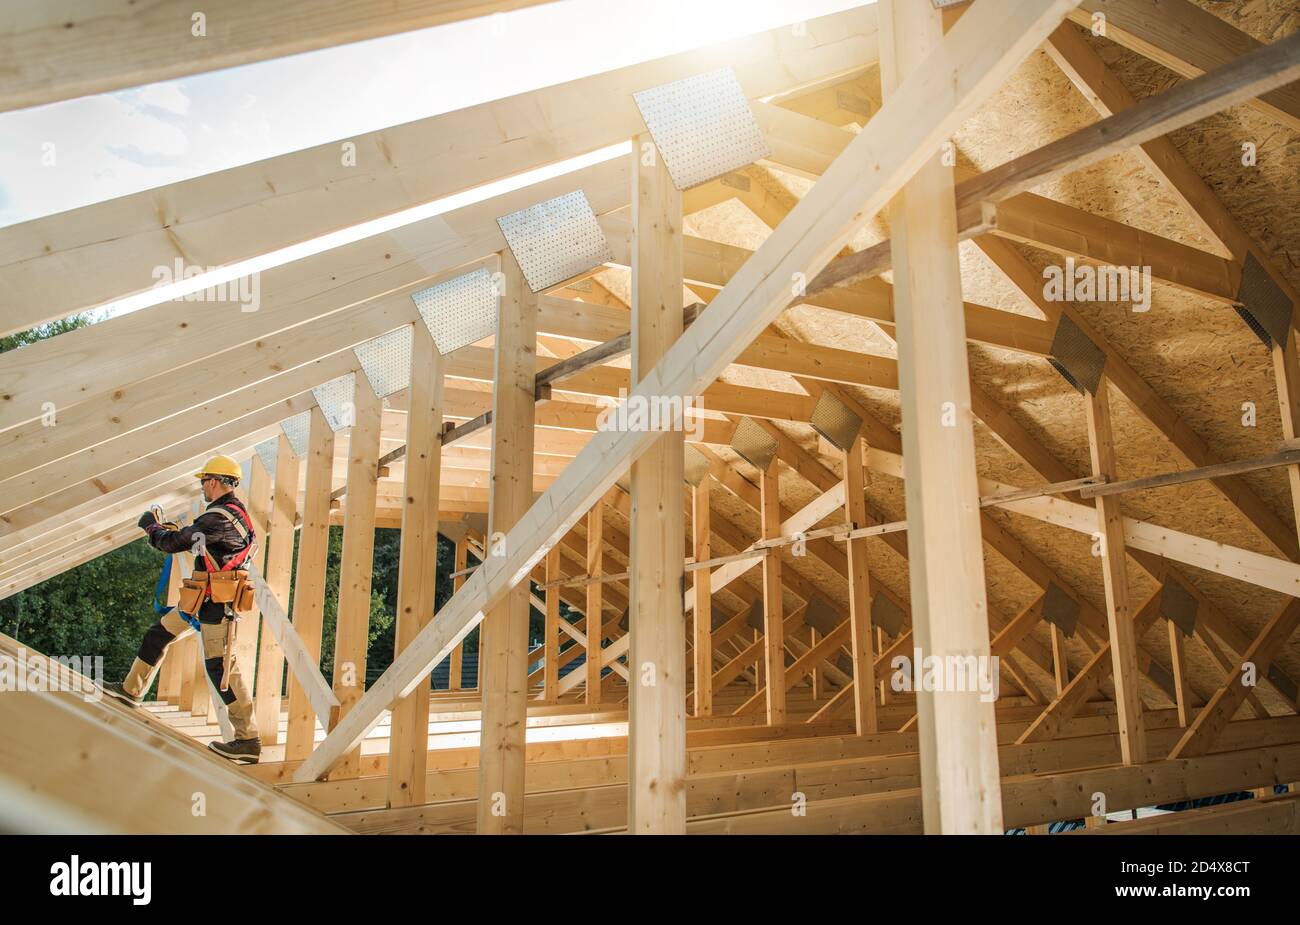 Construction Contractor Worker Building Wooden Roof Skeleton Frame of the Building. Industrial Theme. Stock Photo